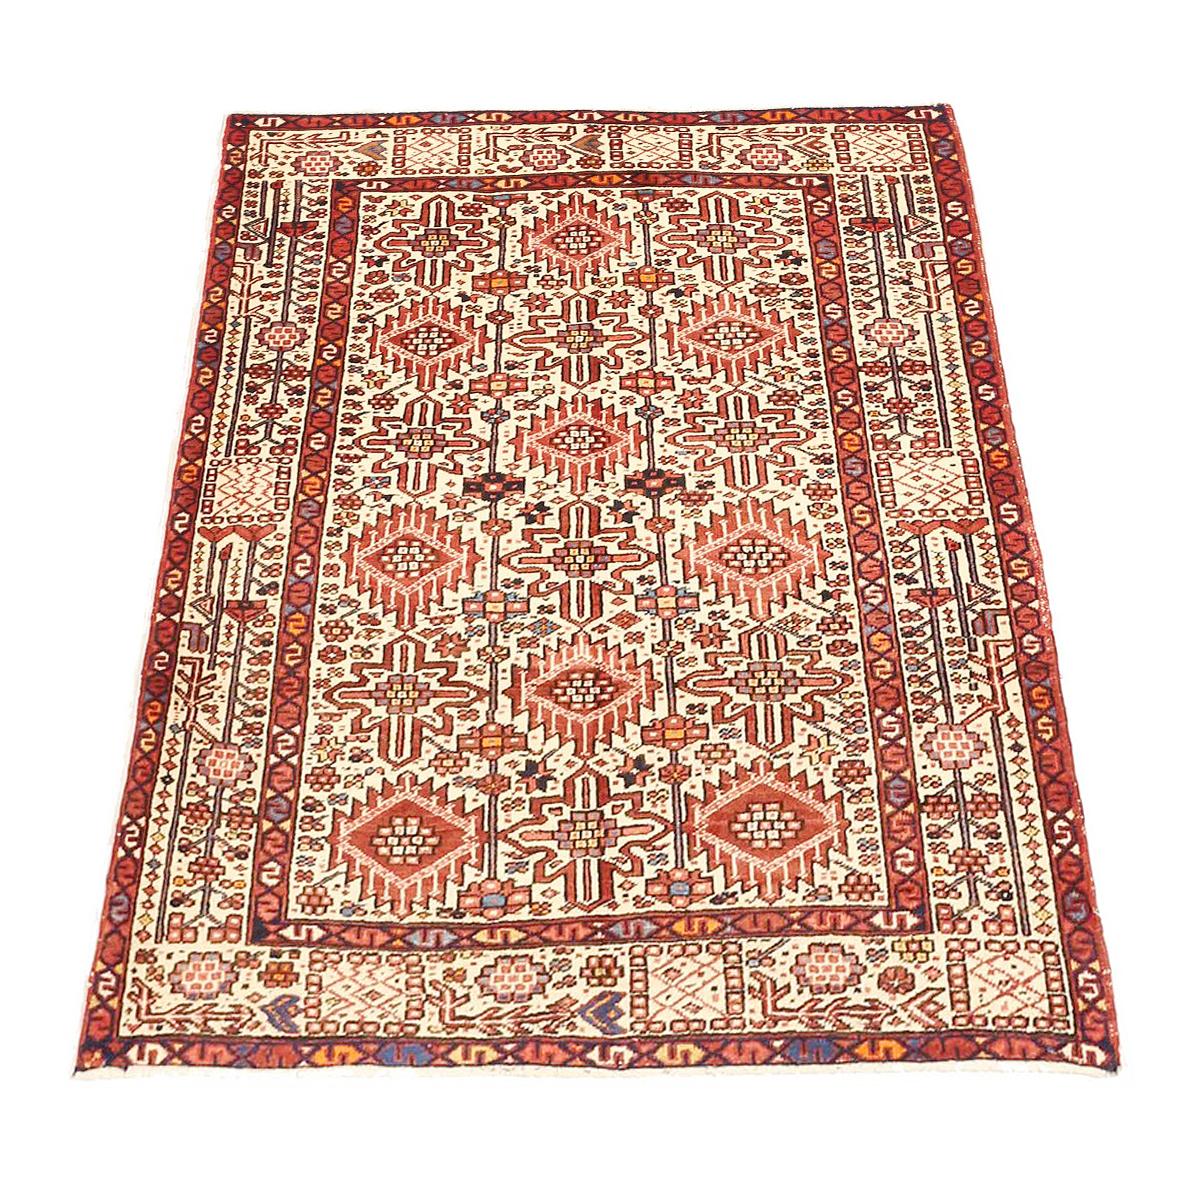 Vintage Persian rug handwoven from the finest sheep’s wool and colored with all-natural vegetable dyes that are safe for humans and pets. It’s a traditional Heriz design featuring a lovely ivory field covered with red and black floral and nature